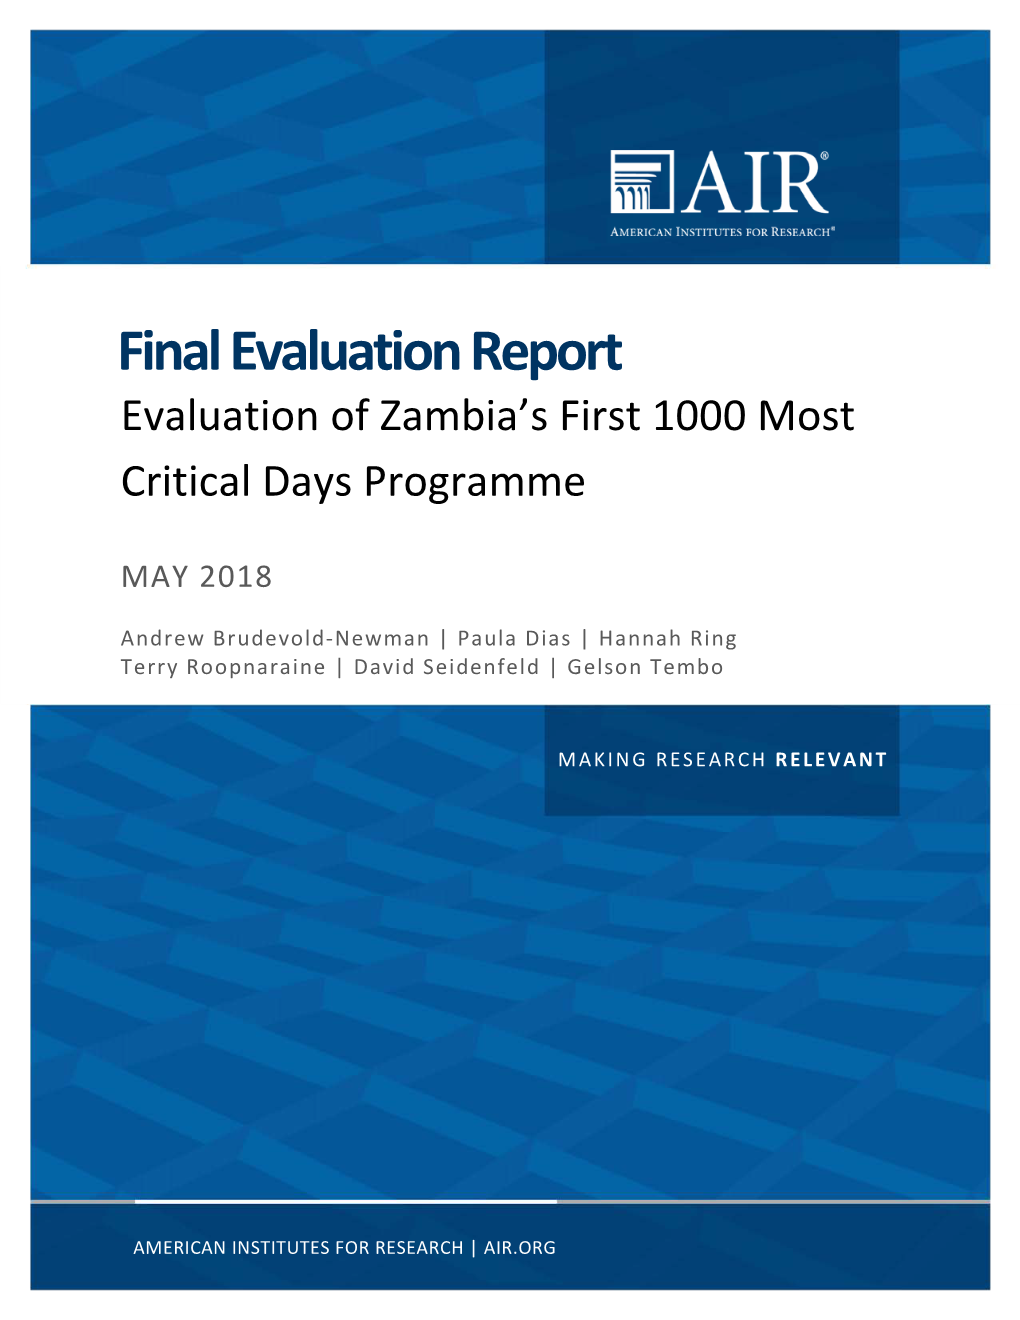 Evaluation of Zambia's First 1000 Most Critical Days Program